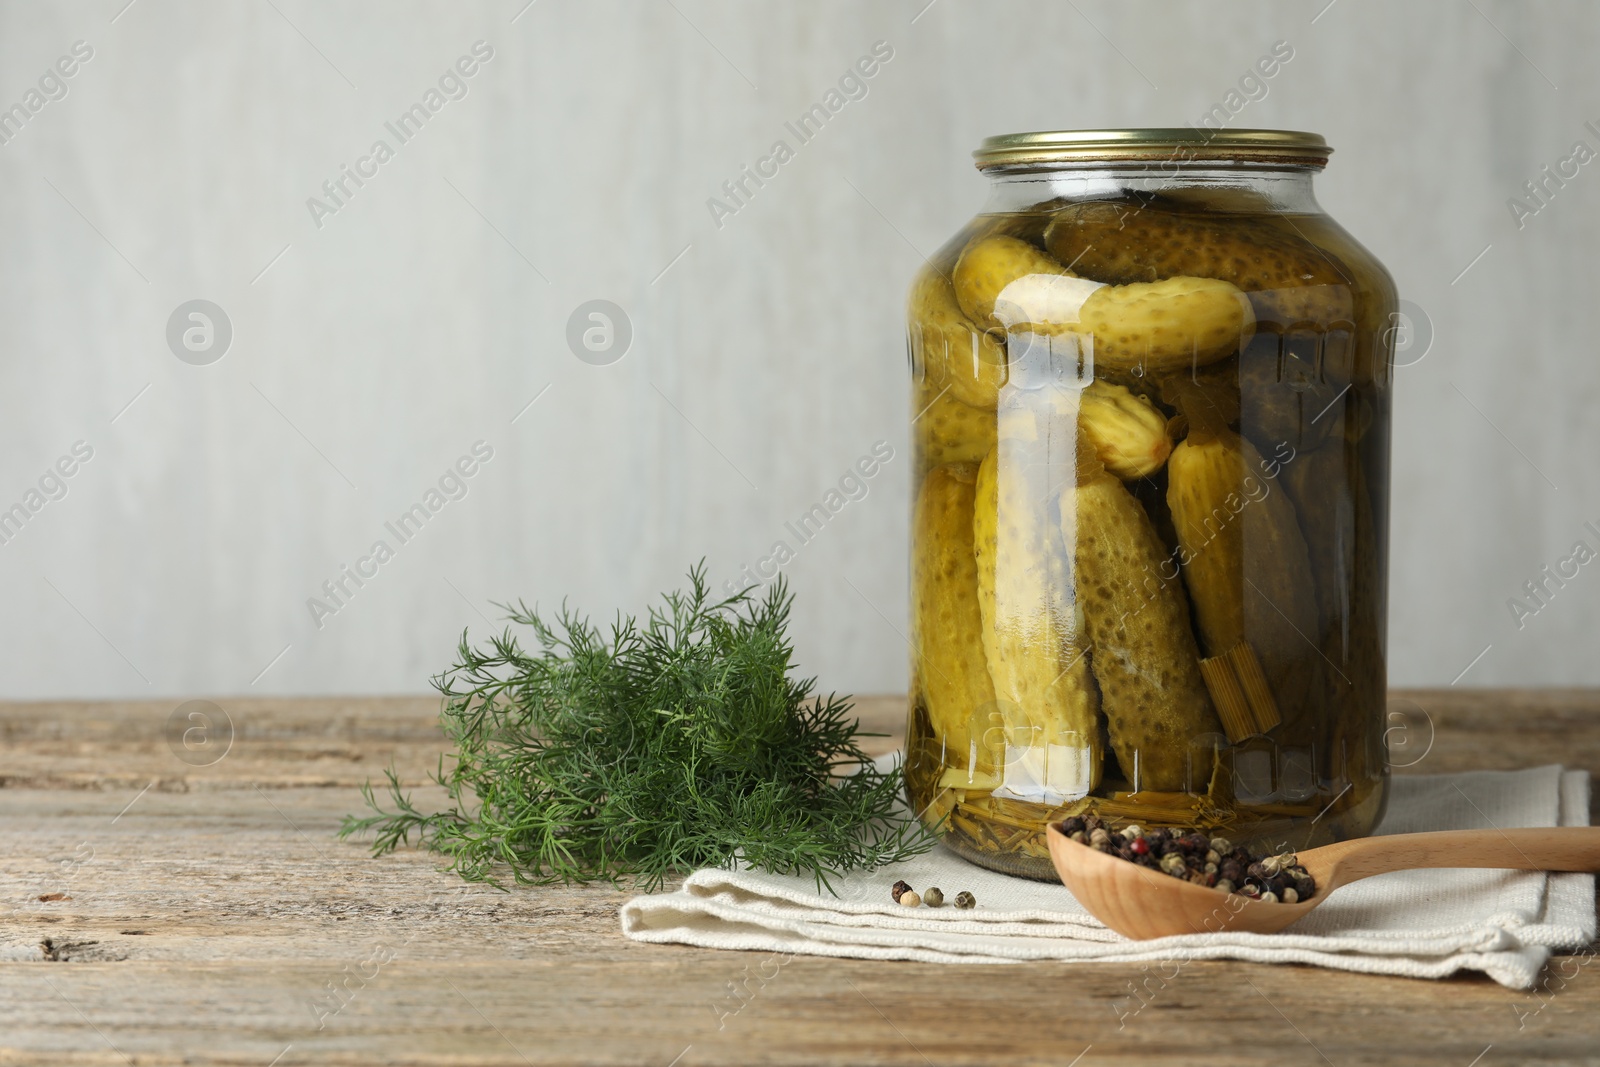 Photo of Pickled cucumbers in jar, dill and peppercorns on wooden table. Space for text